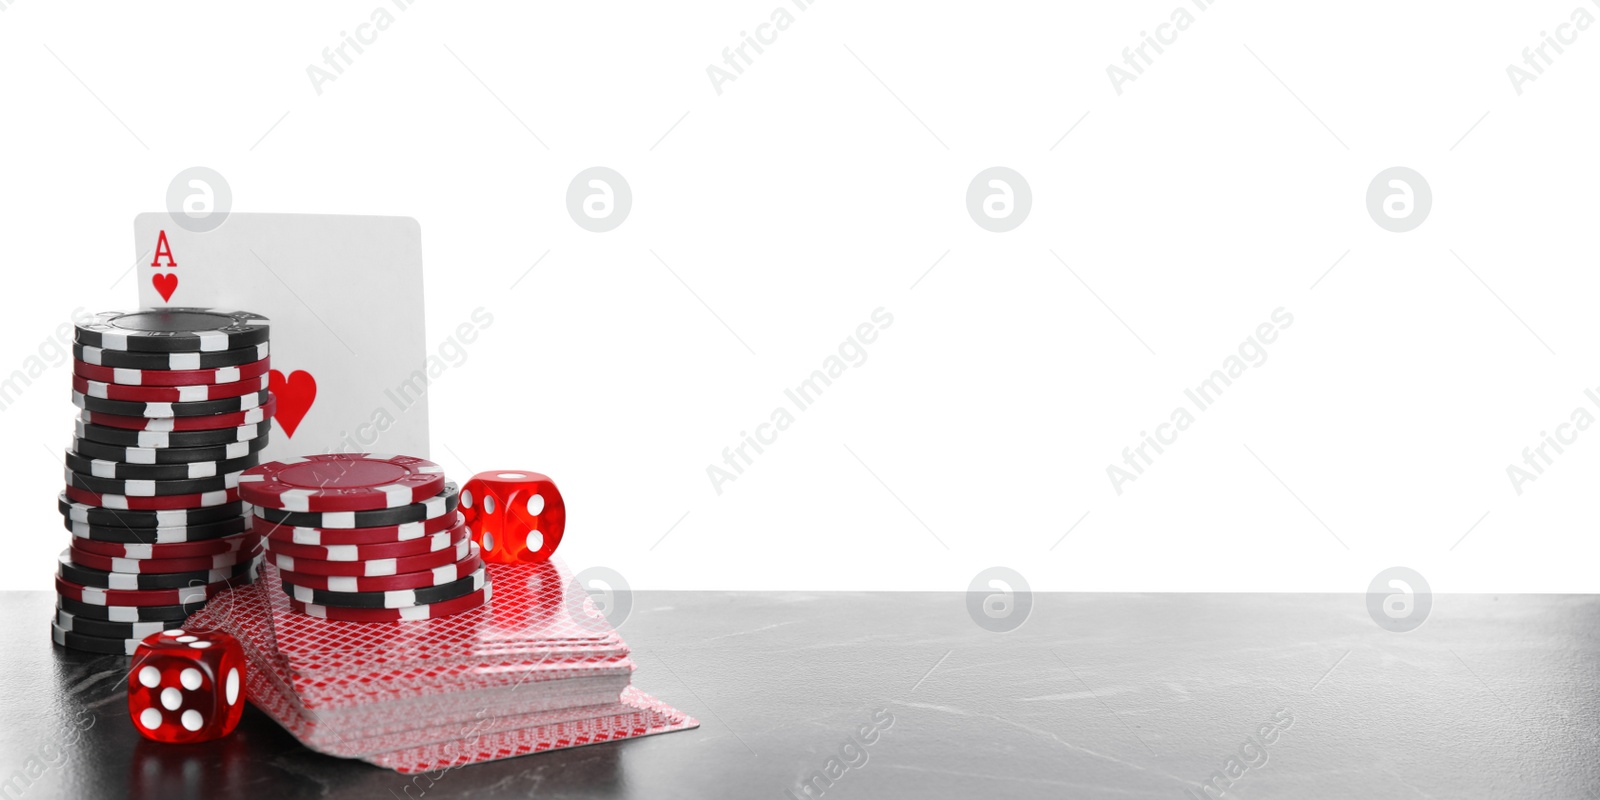 Photo of Gaming chips, dices and cards on table against white background